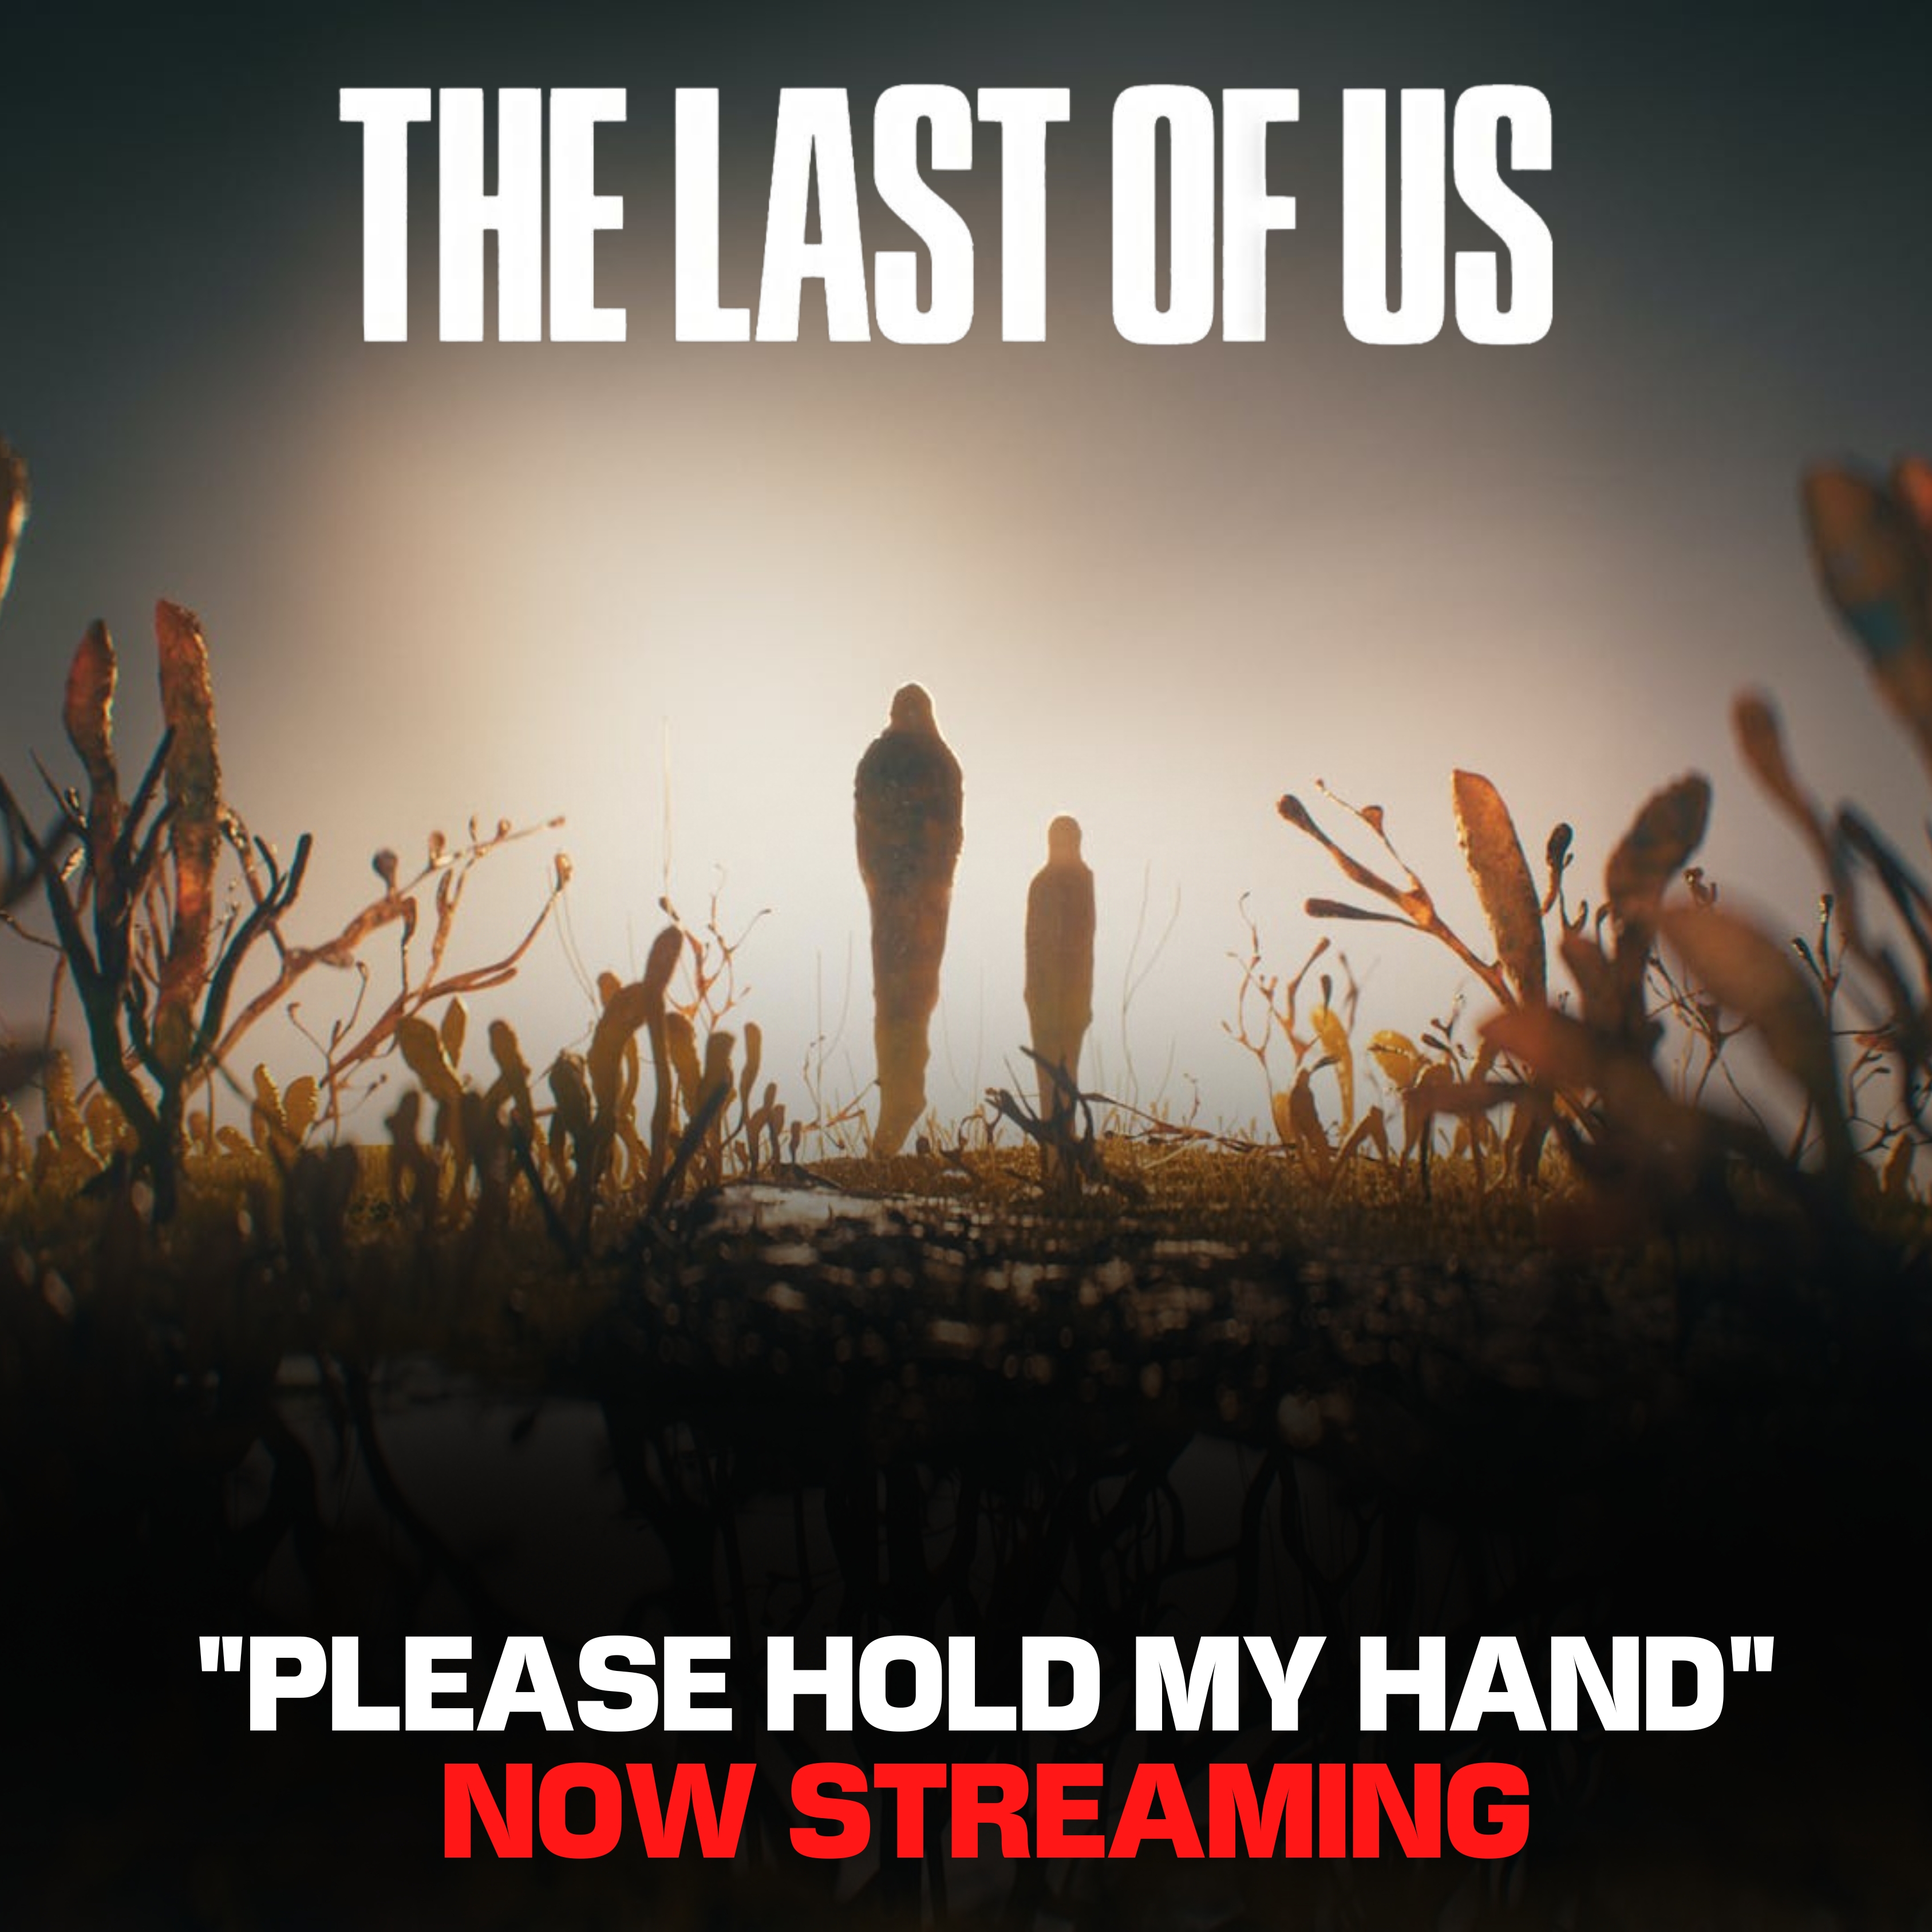 How long is The Last of Us Episode 4? Please Hold to My Hand